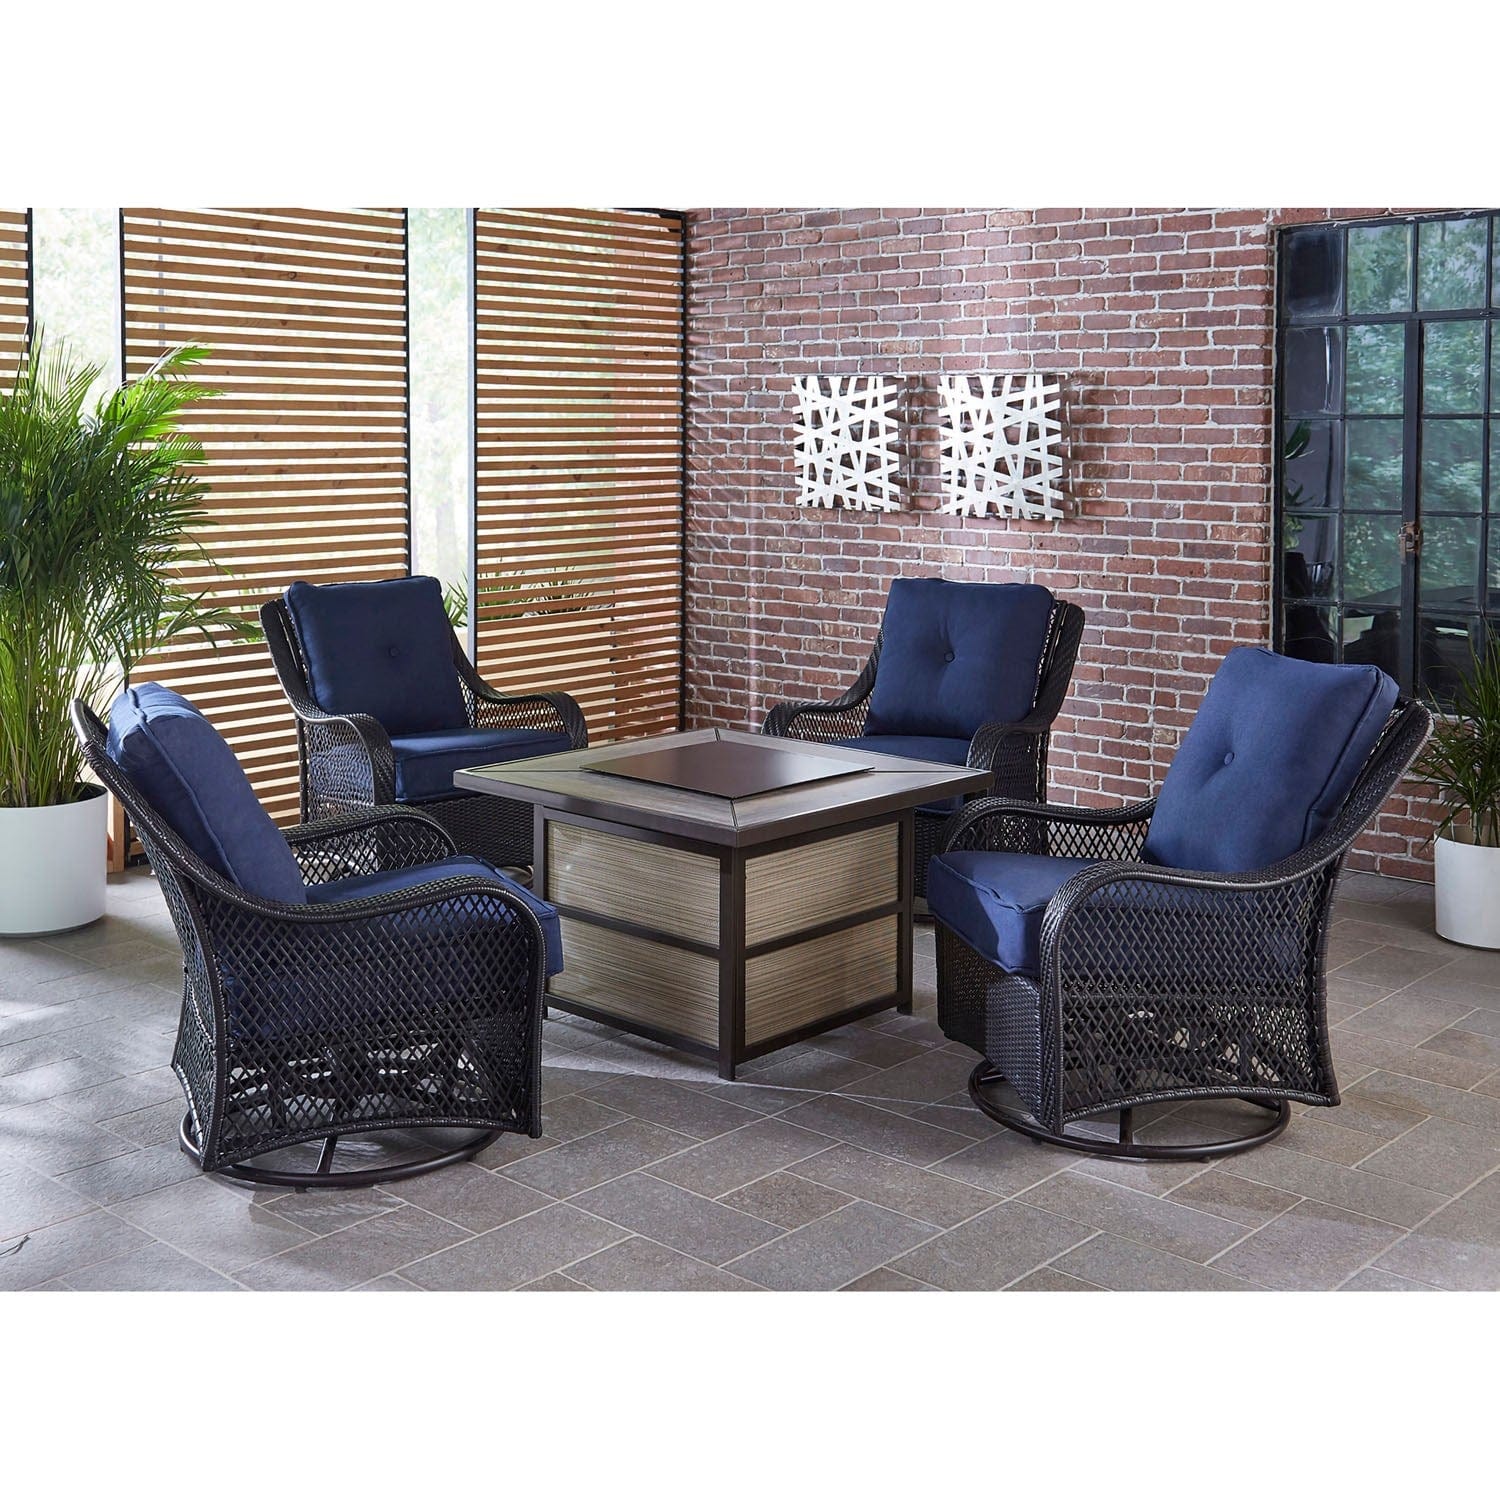 Hanover Fire Pit Chat Set Hanover Orleans 5-Piece Fire Pit Chat Set with a 40,000 BTU Fire Pit Table and 4 Woven Swivel Gliders in Navy Blue | ORL5PCSW4SQFP-NVY